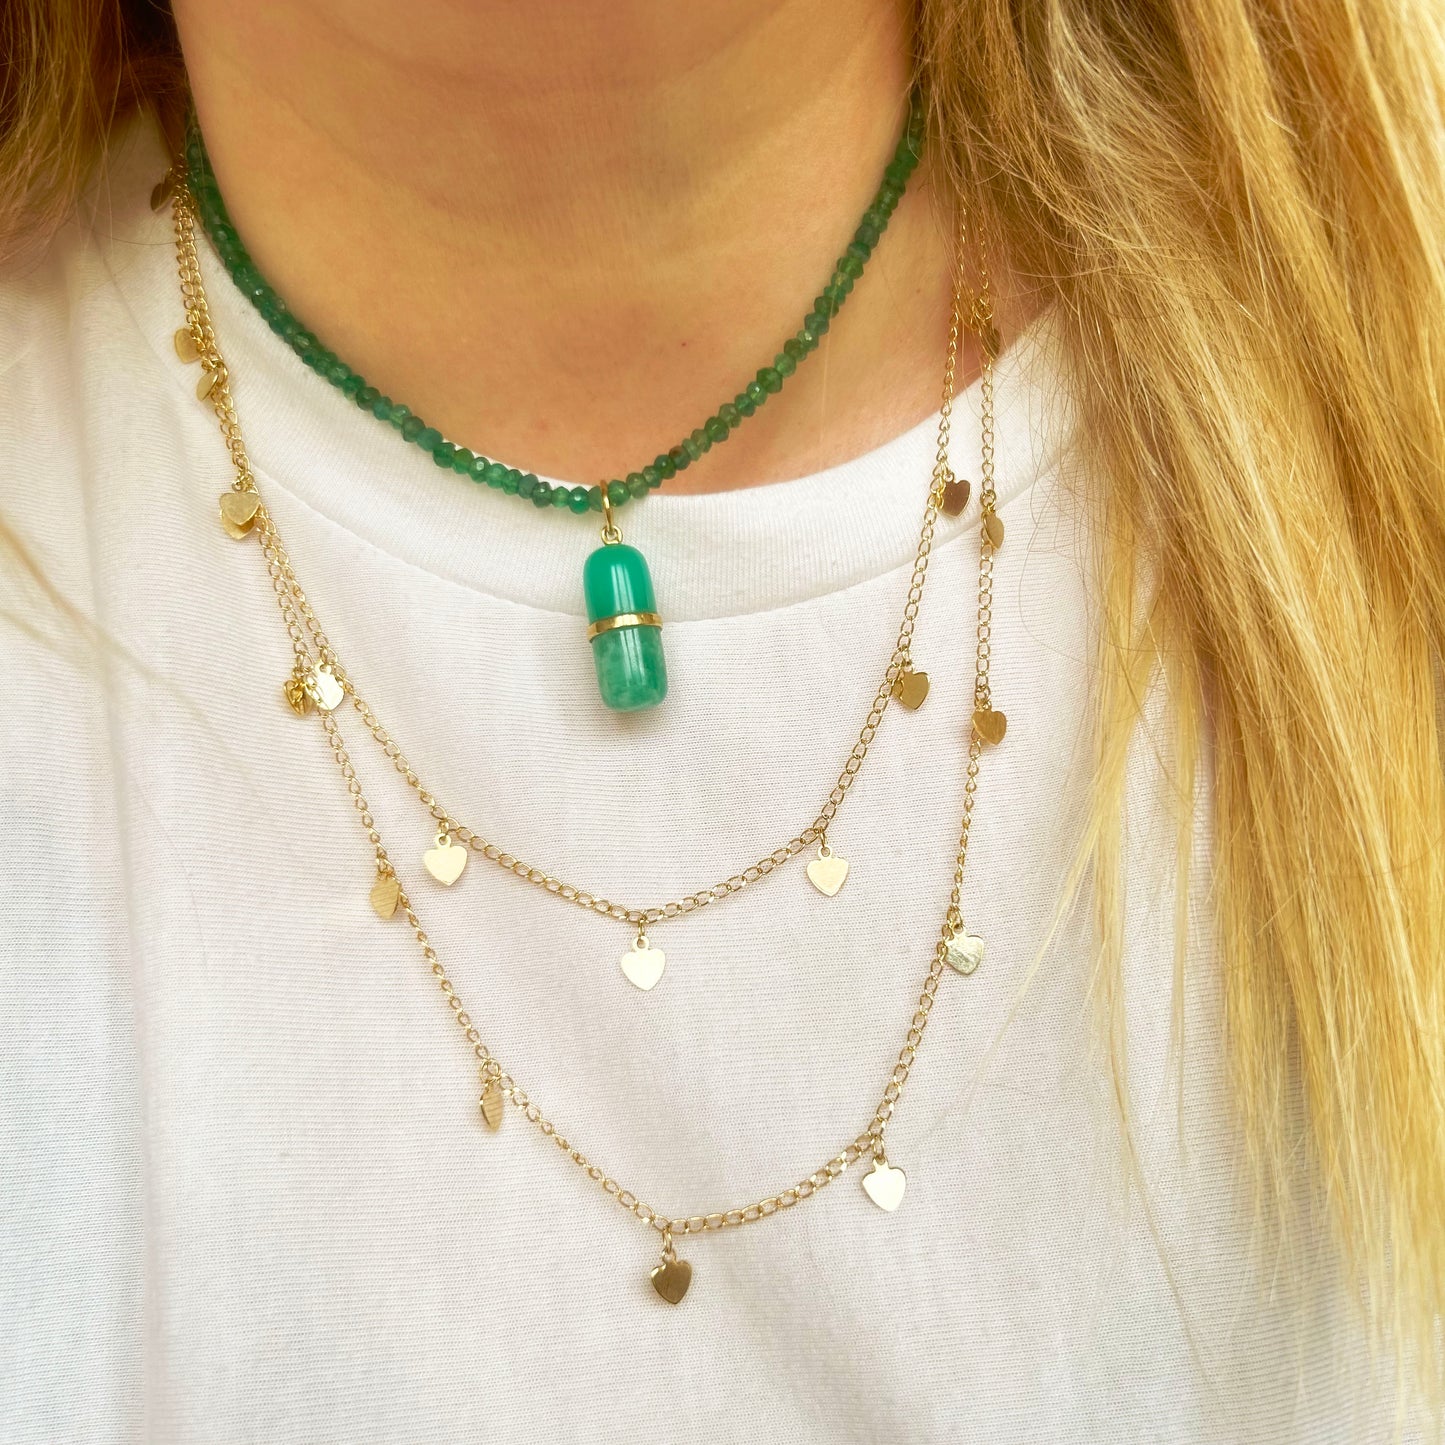 Gemstone Necklace | Green Onyx Accent